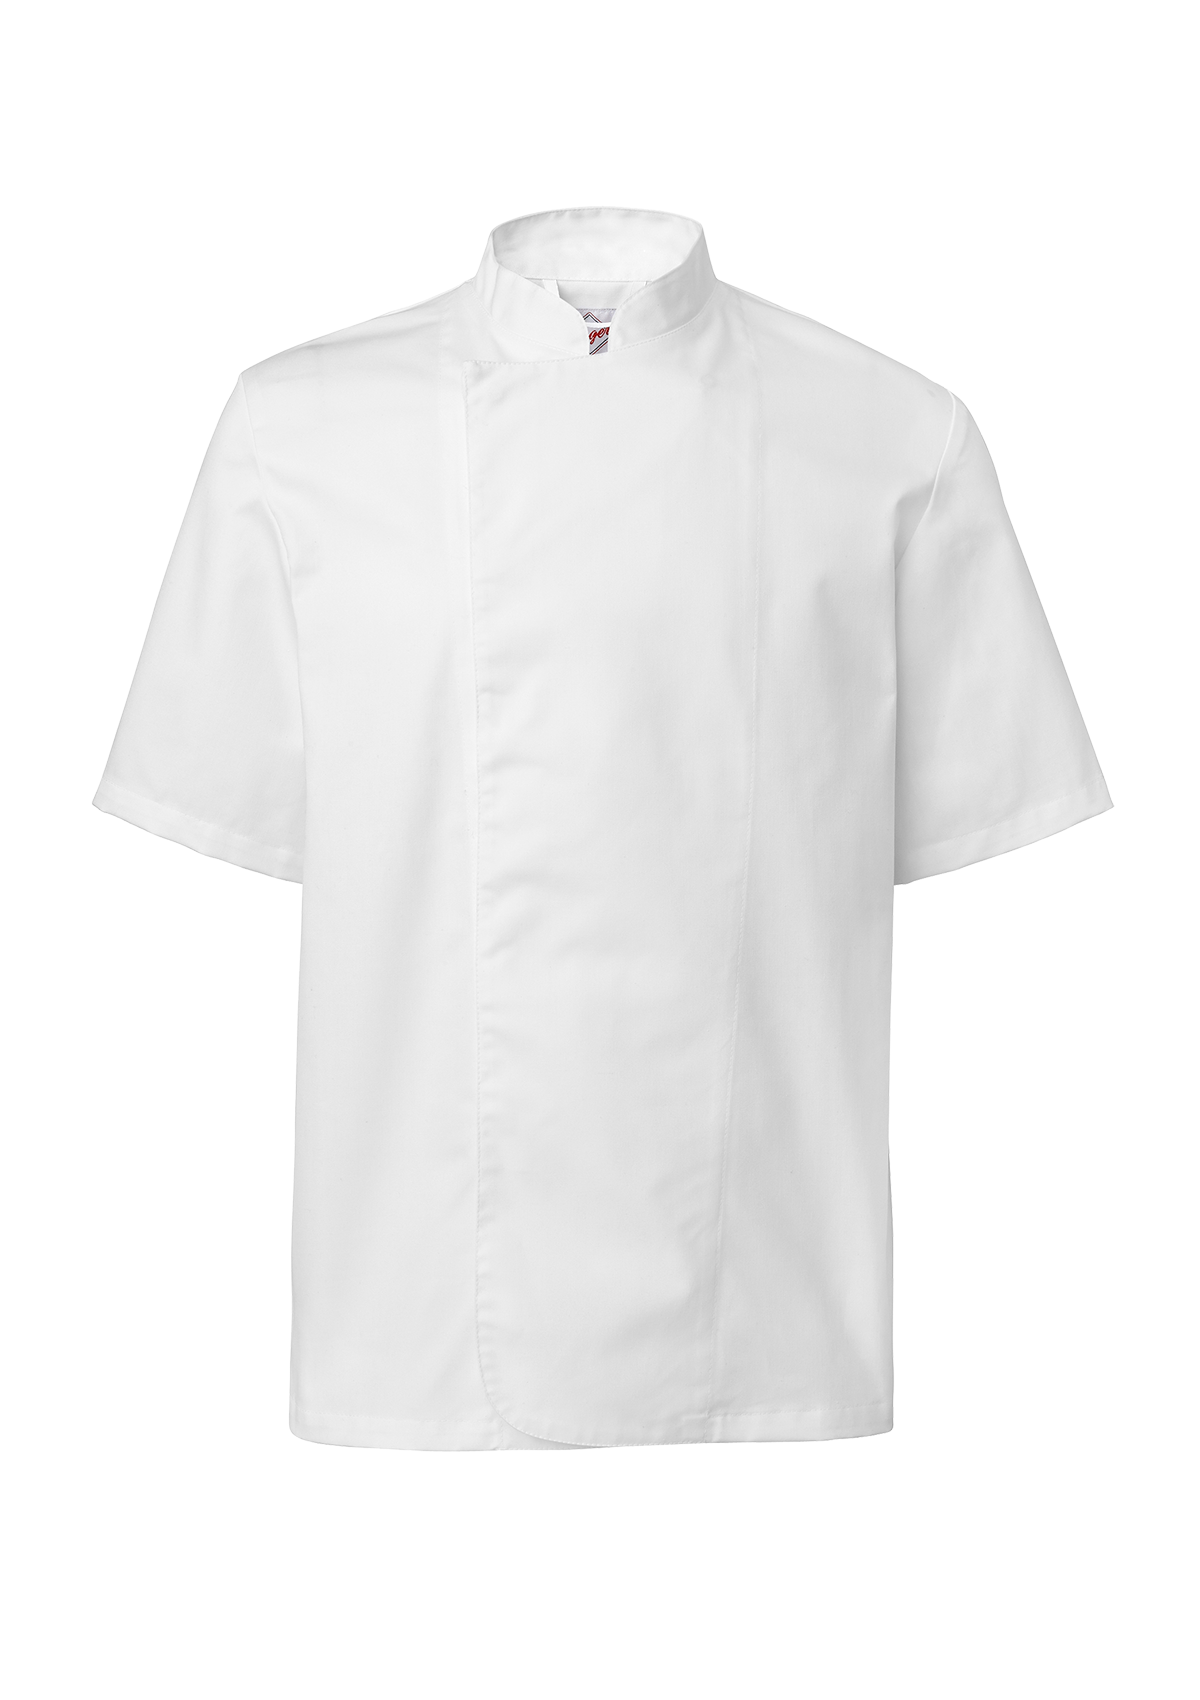 Men's chef jacket in classic straight cut with short sleeves. Segers | Cookniche